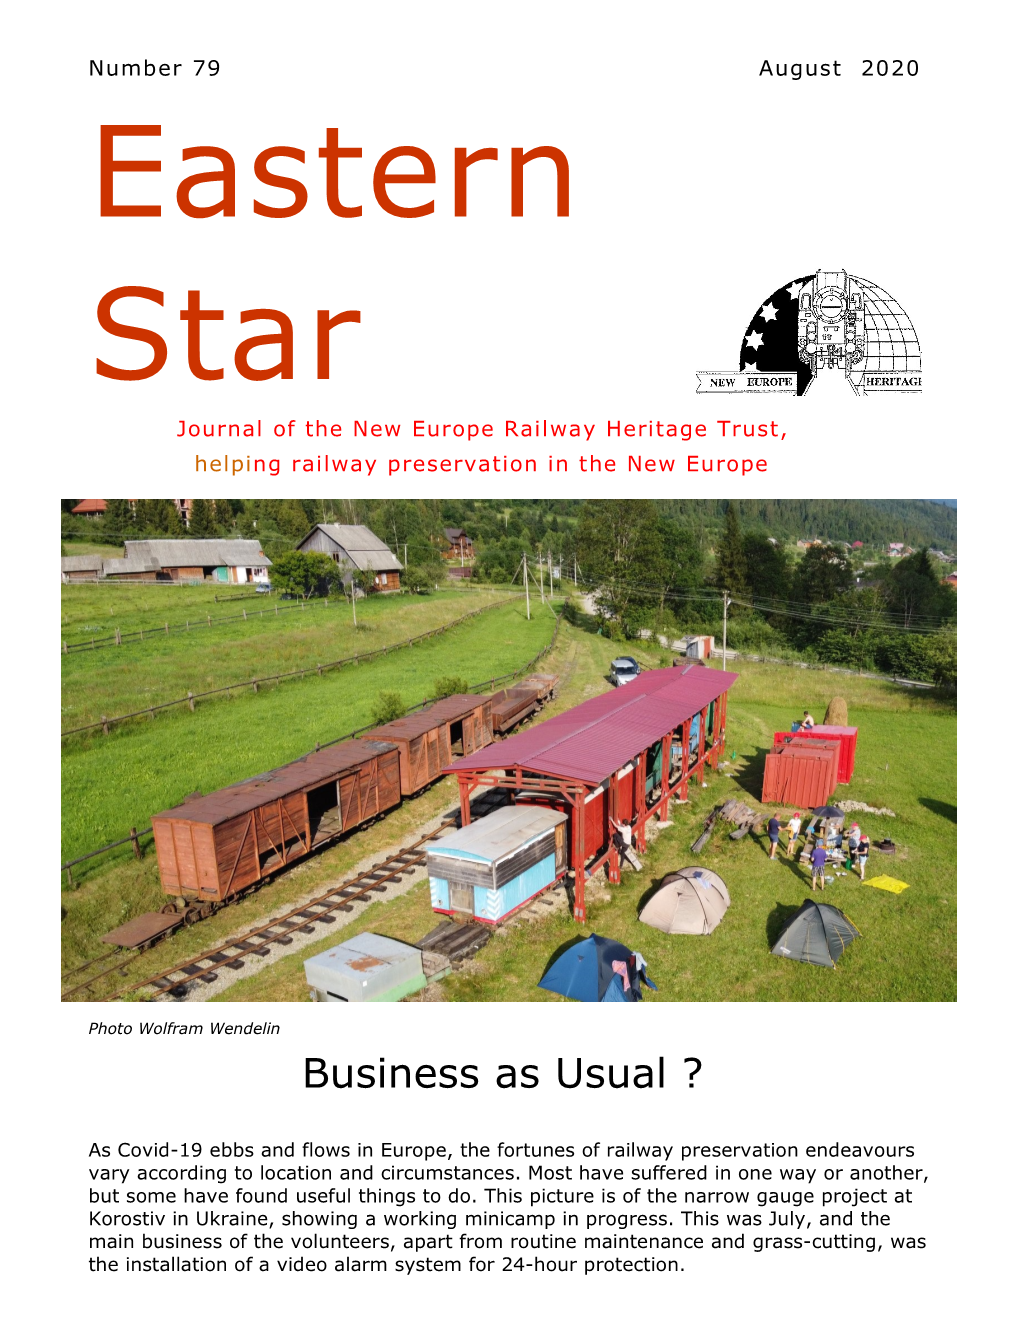 Number 79 August 2020 Eastern Star Journal of the New Europe Railway Heritage Trust, Helping Railway Preservation in the New Europe